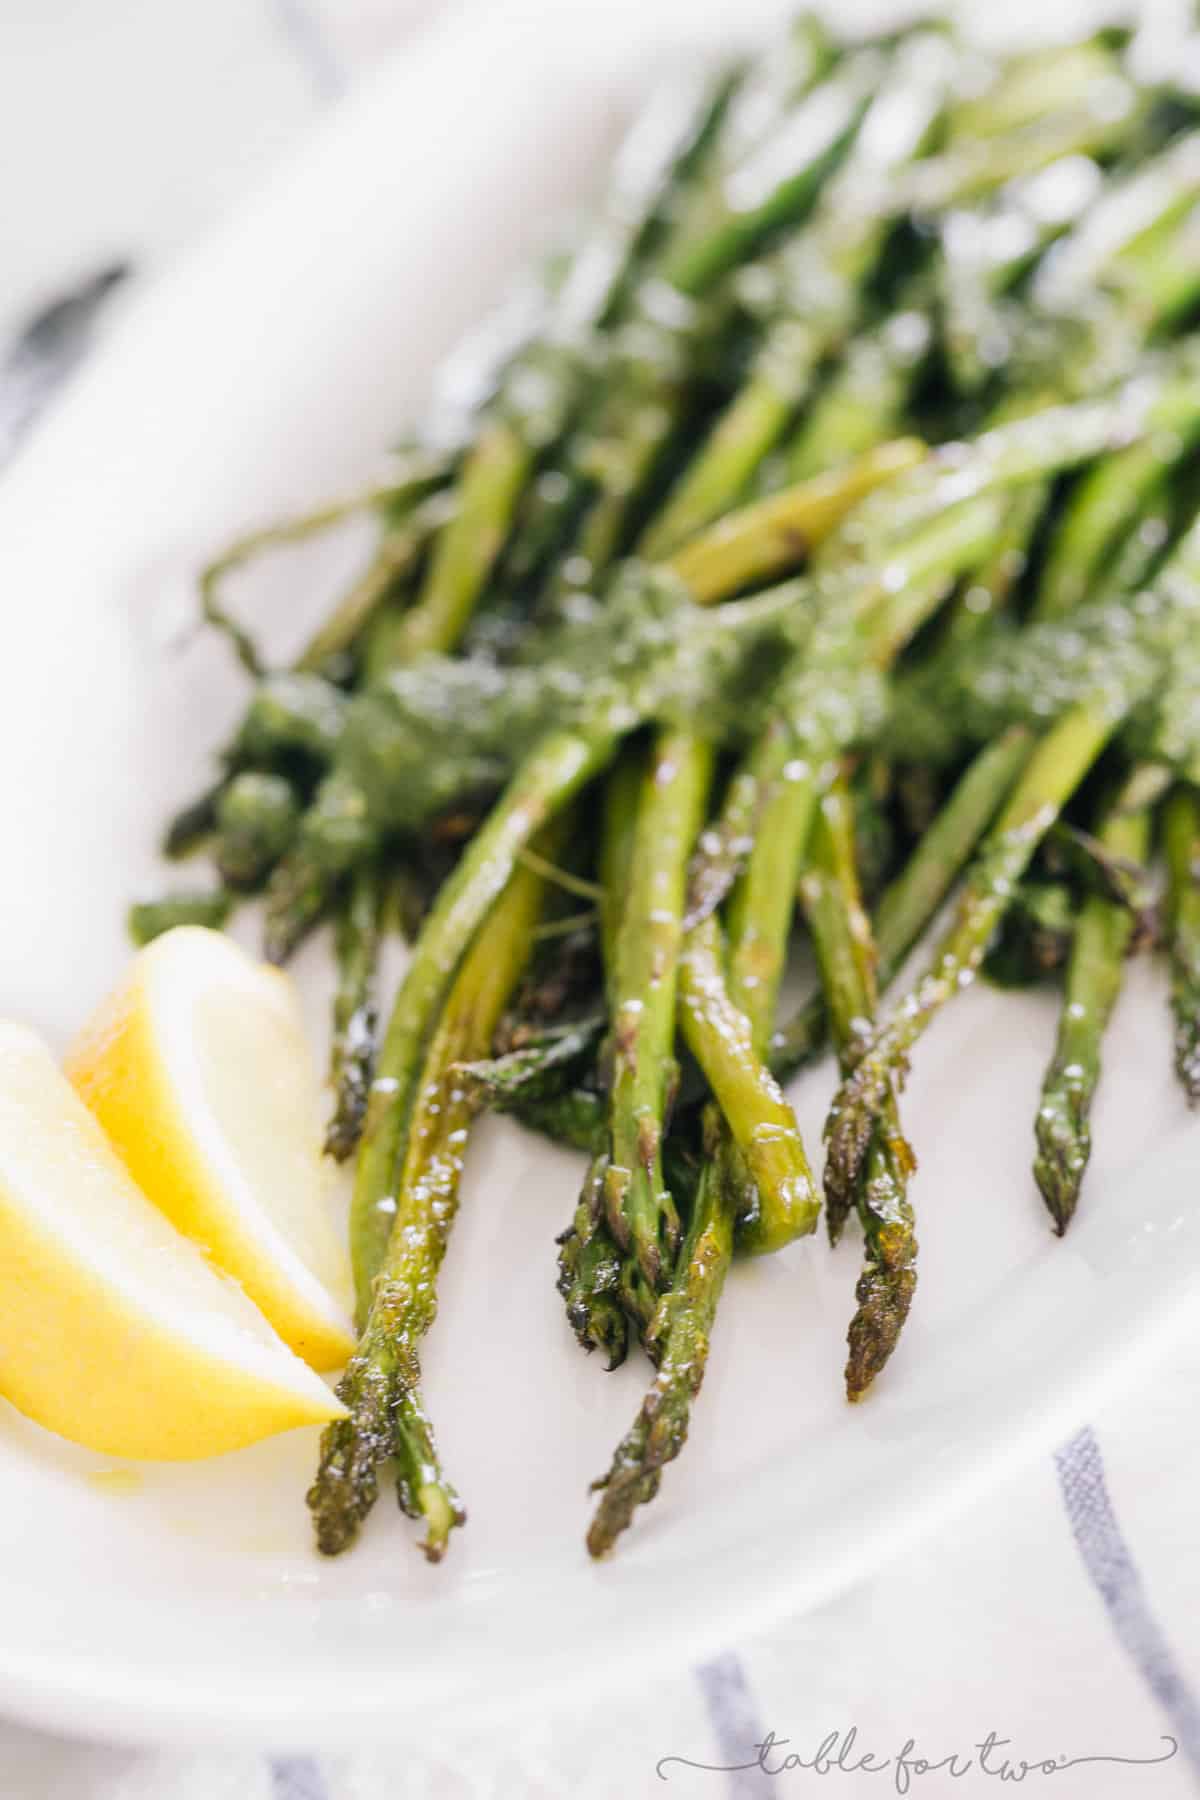 Dress up your asparagus this season with a lemony pesto drizzled all over! This roasted lemony pesto asparagus will be a new favorite side dish!